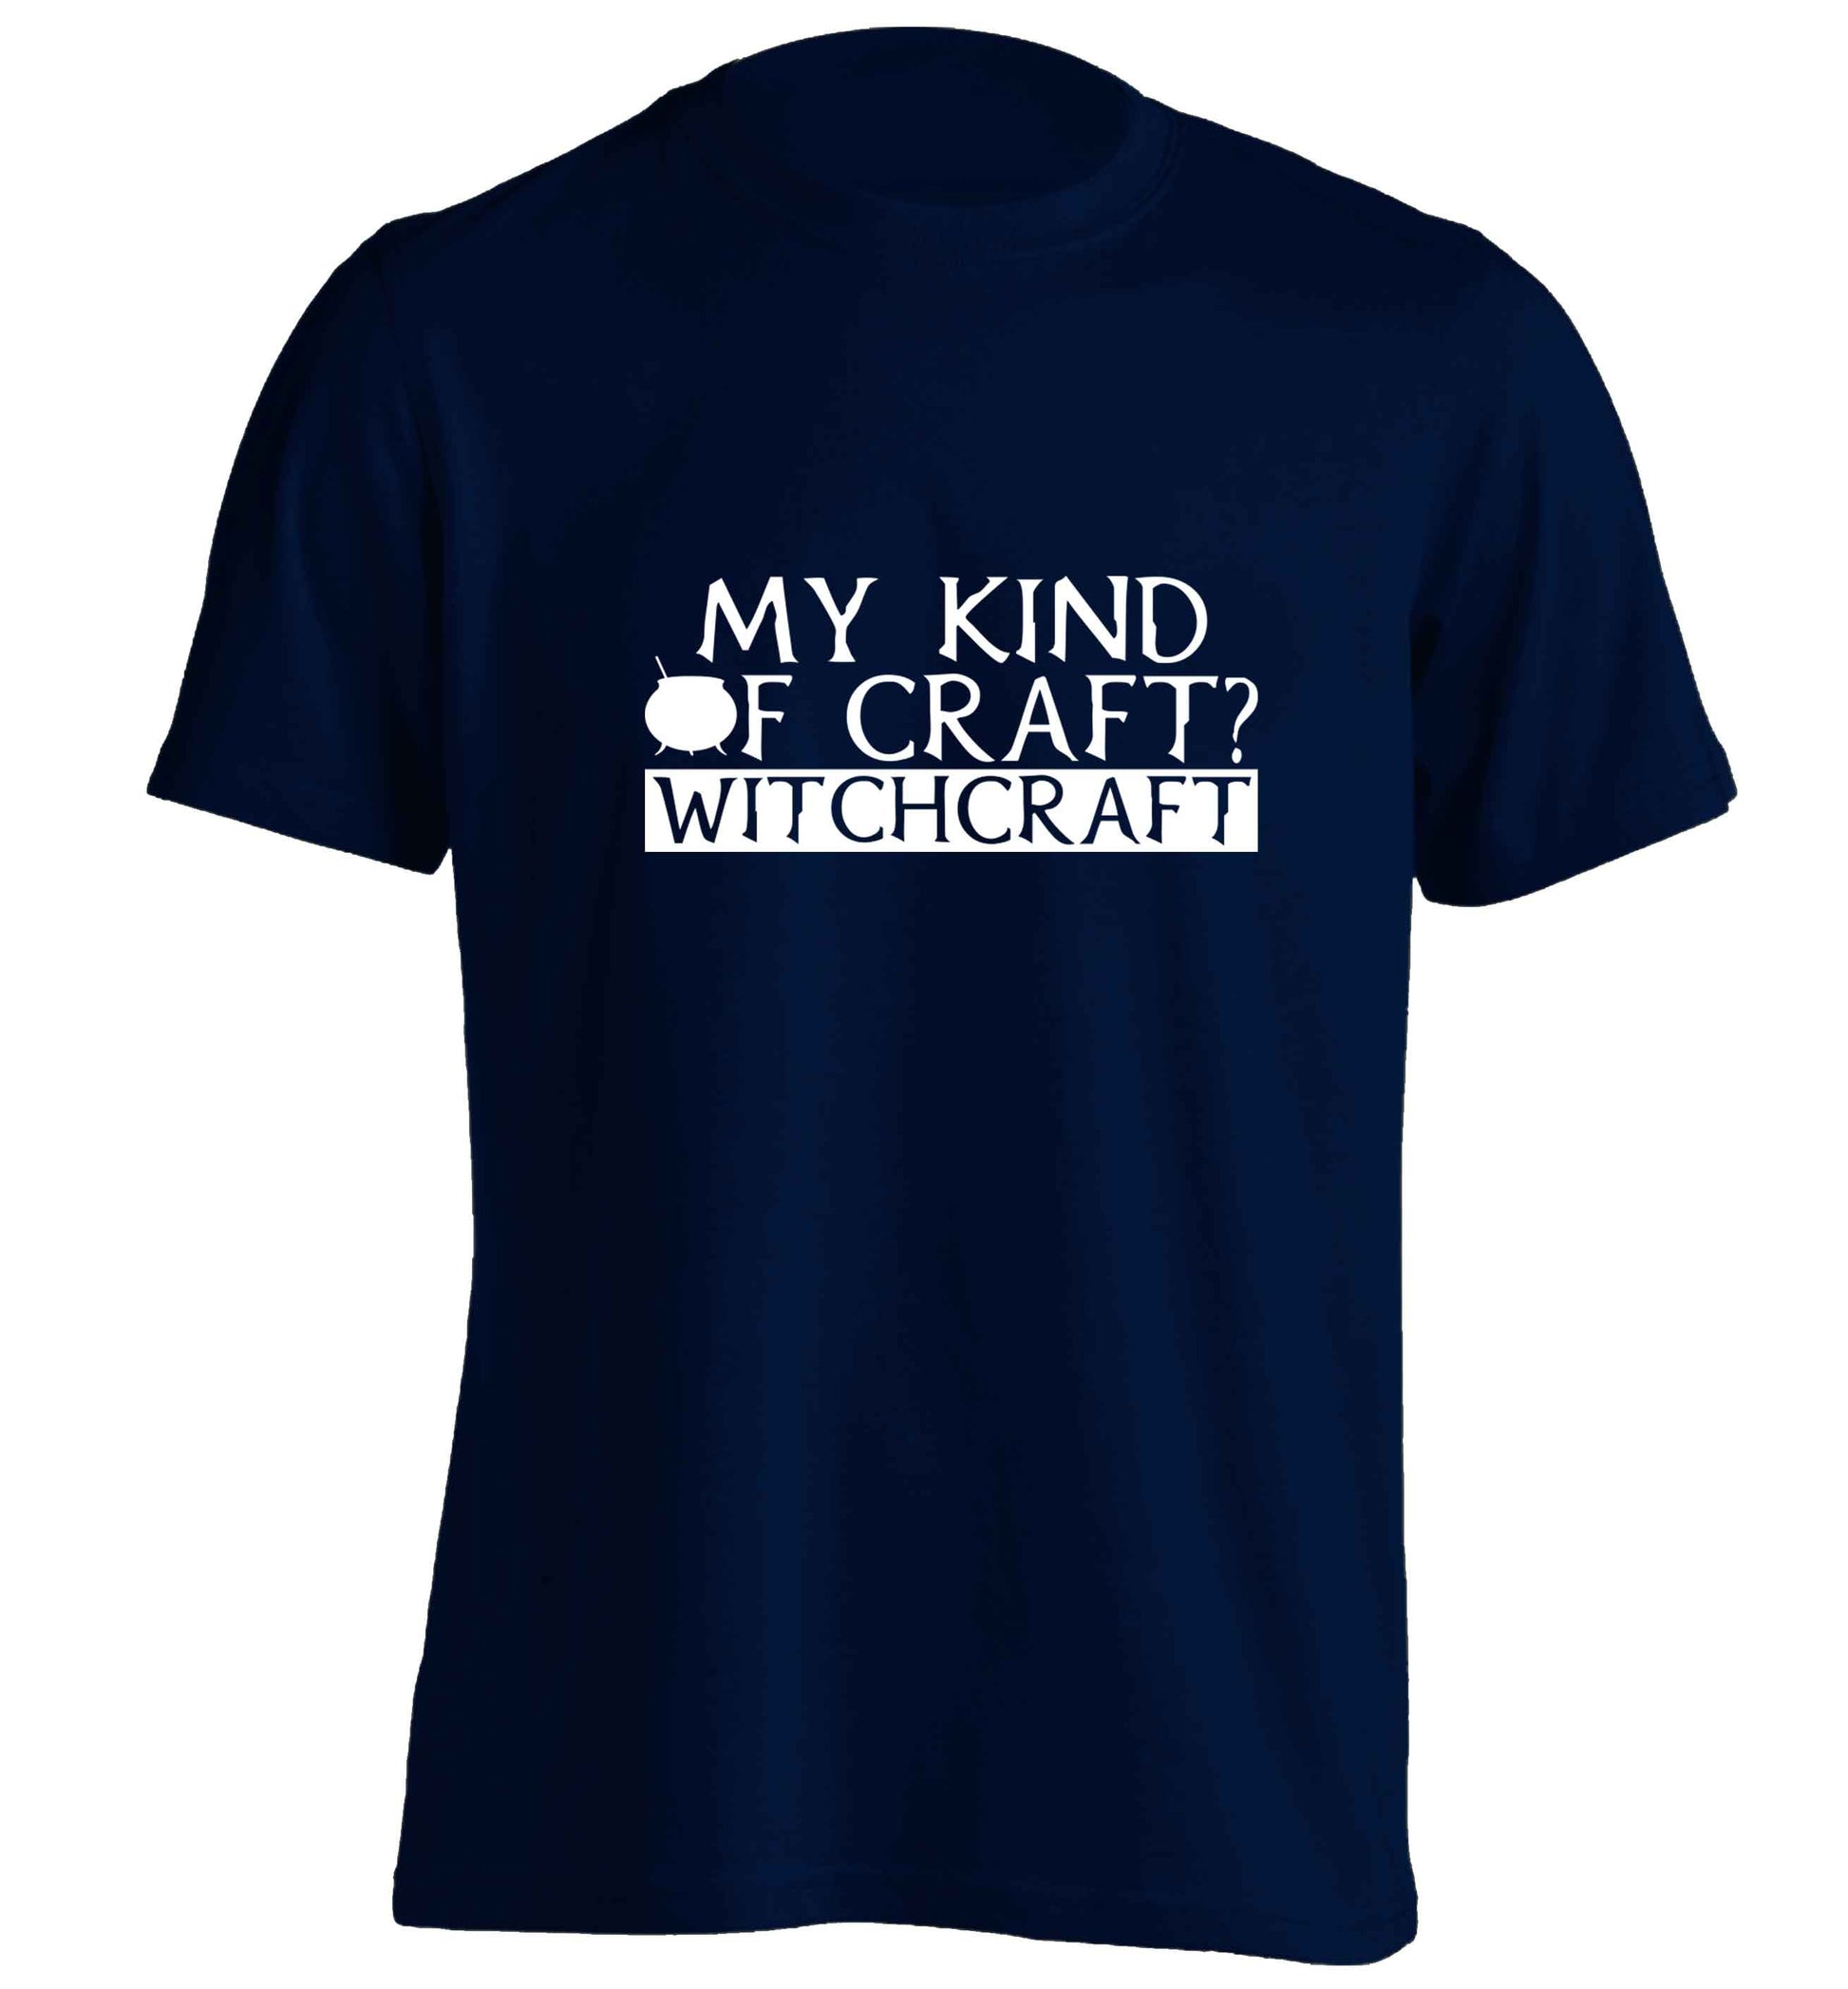 My king of craft? witchcraft  adults unisex navy Tshirt 2XL